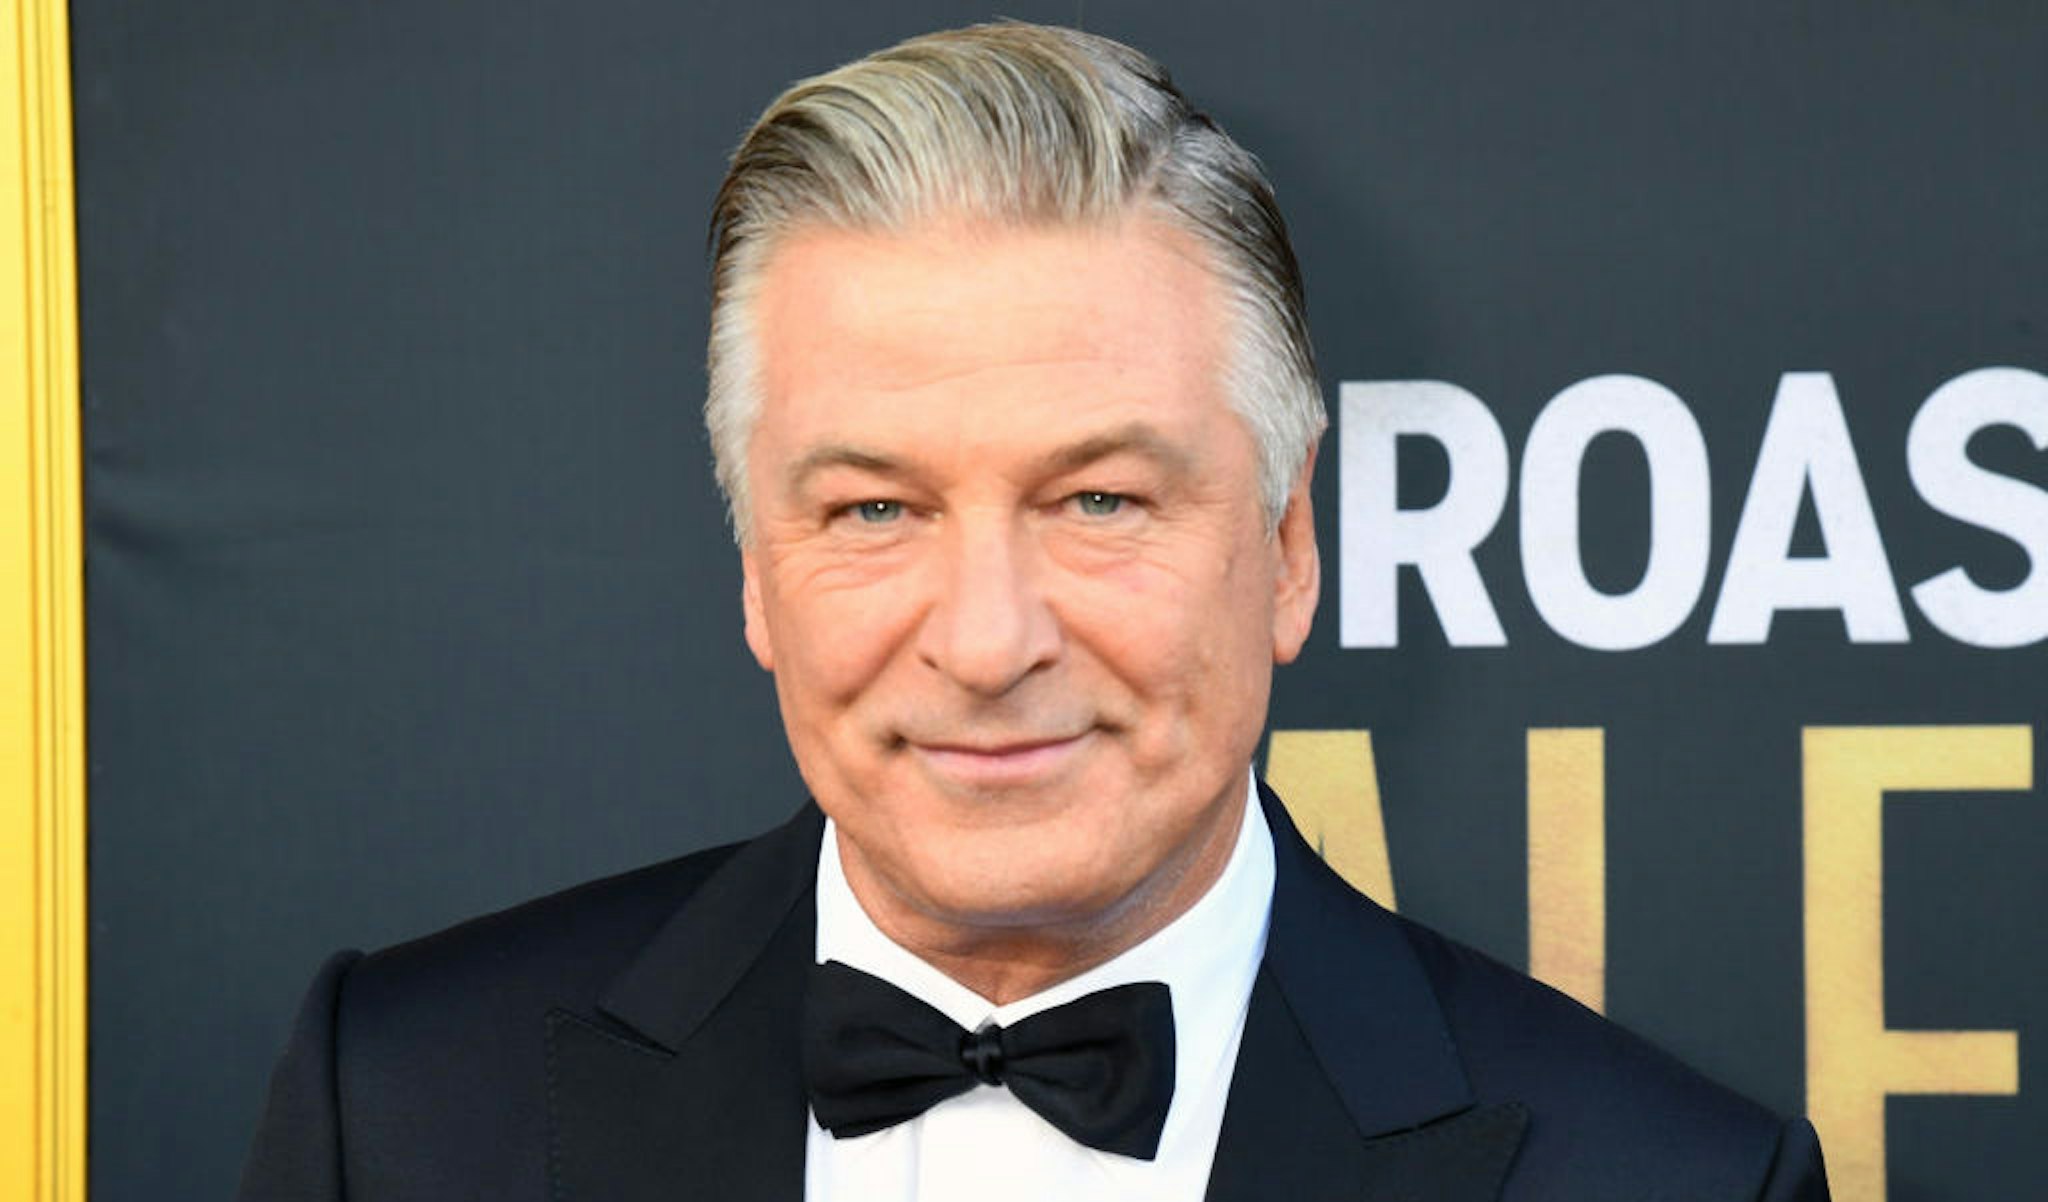 BEVERLY HILLS, CALIFORNIA - SEPTEMBER 07: Alec Baldwin attends the Comedy Central Roast of Alec Baldwin at Saban Theatre on September 07, 2019 in Beverly Hills, California. (Photo by Jeff Kravitz/FilmMagic)